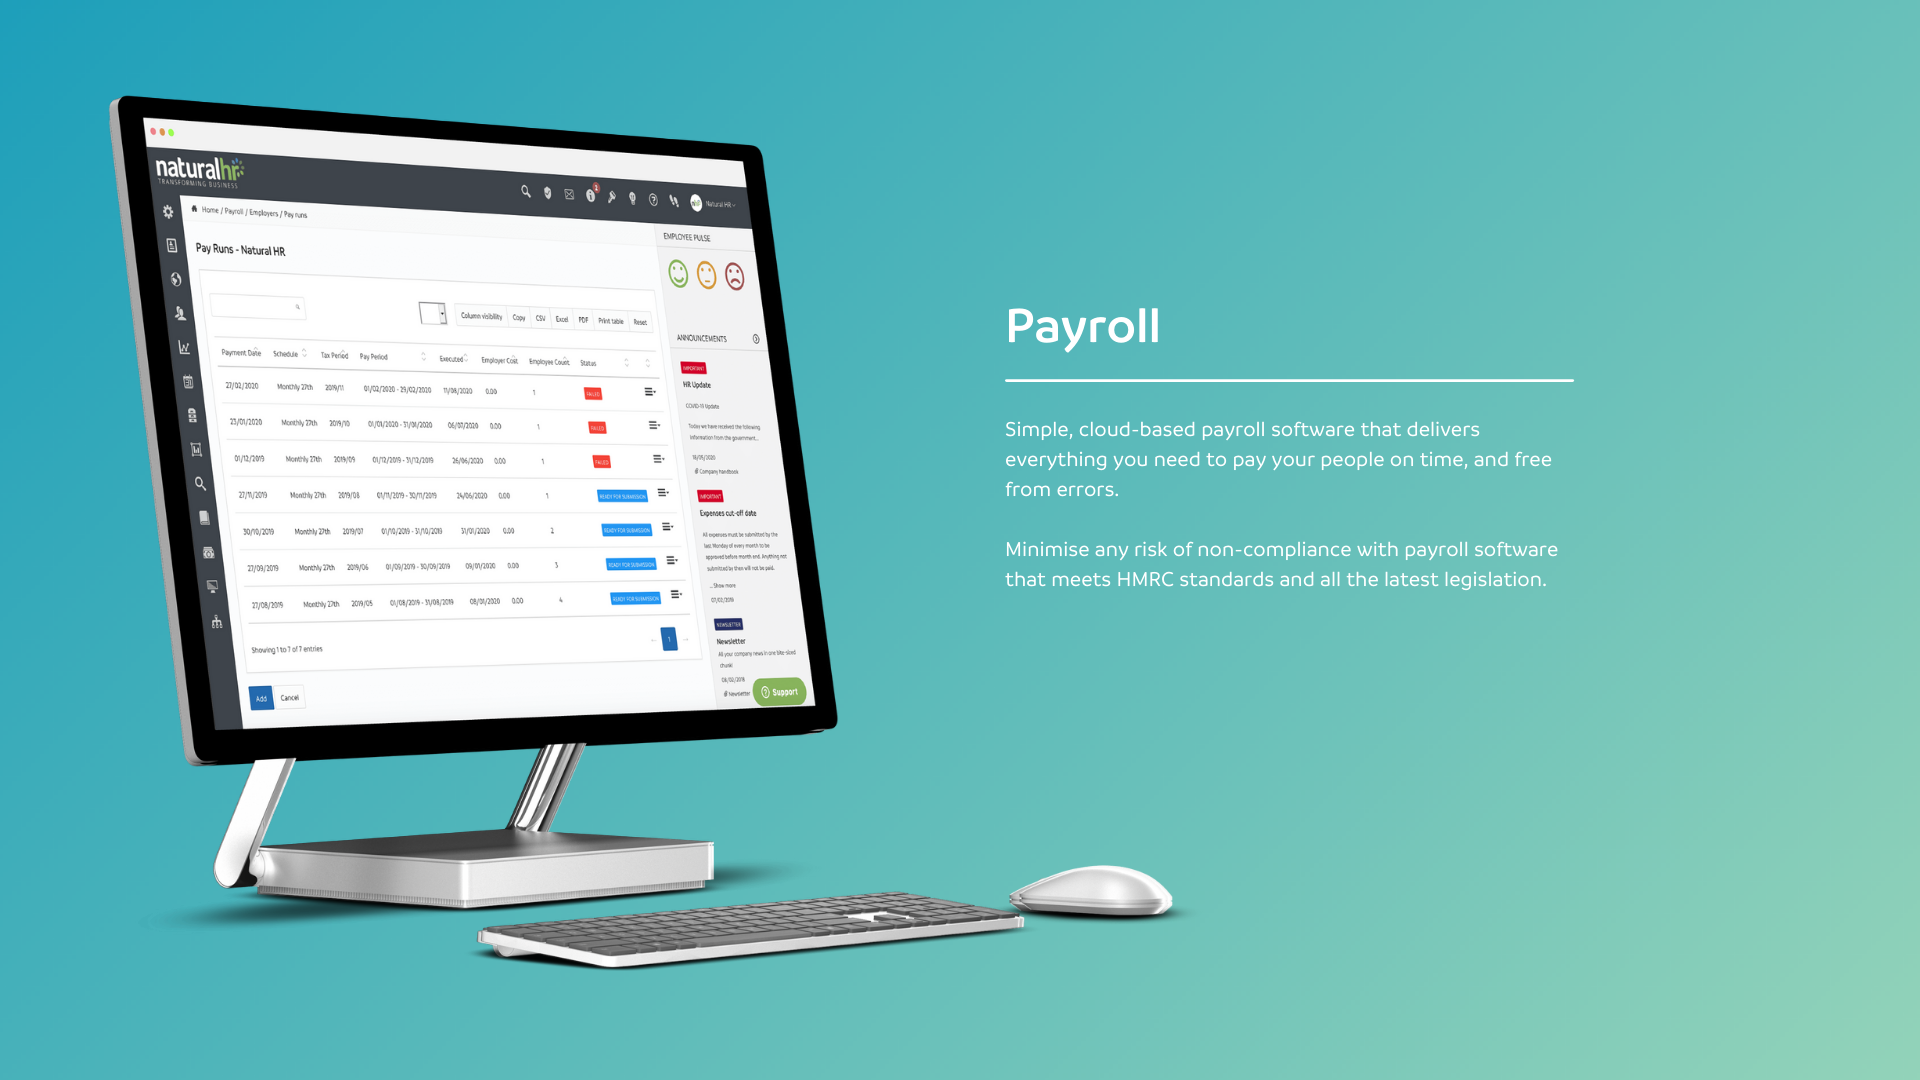 Simple, cloud-based payroll software that delivers everything you need to pay your people on time, and free from errors.